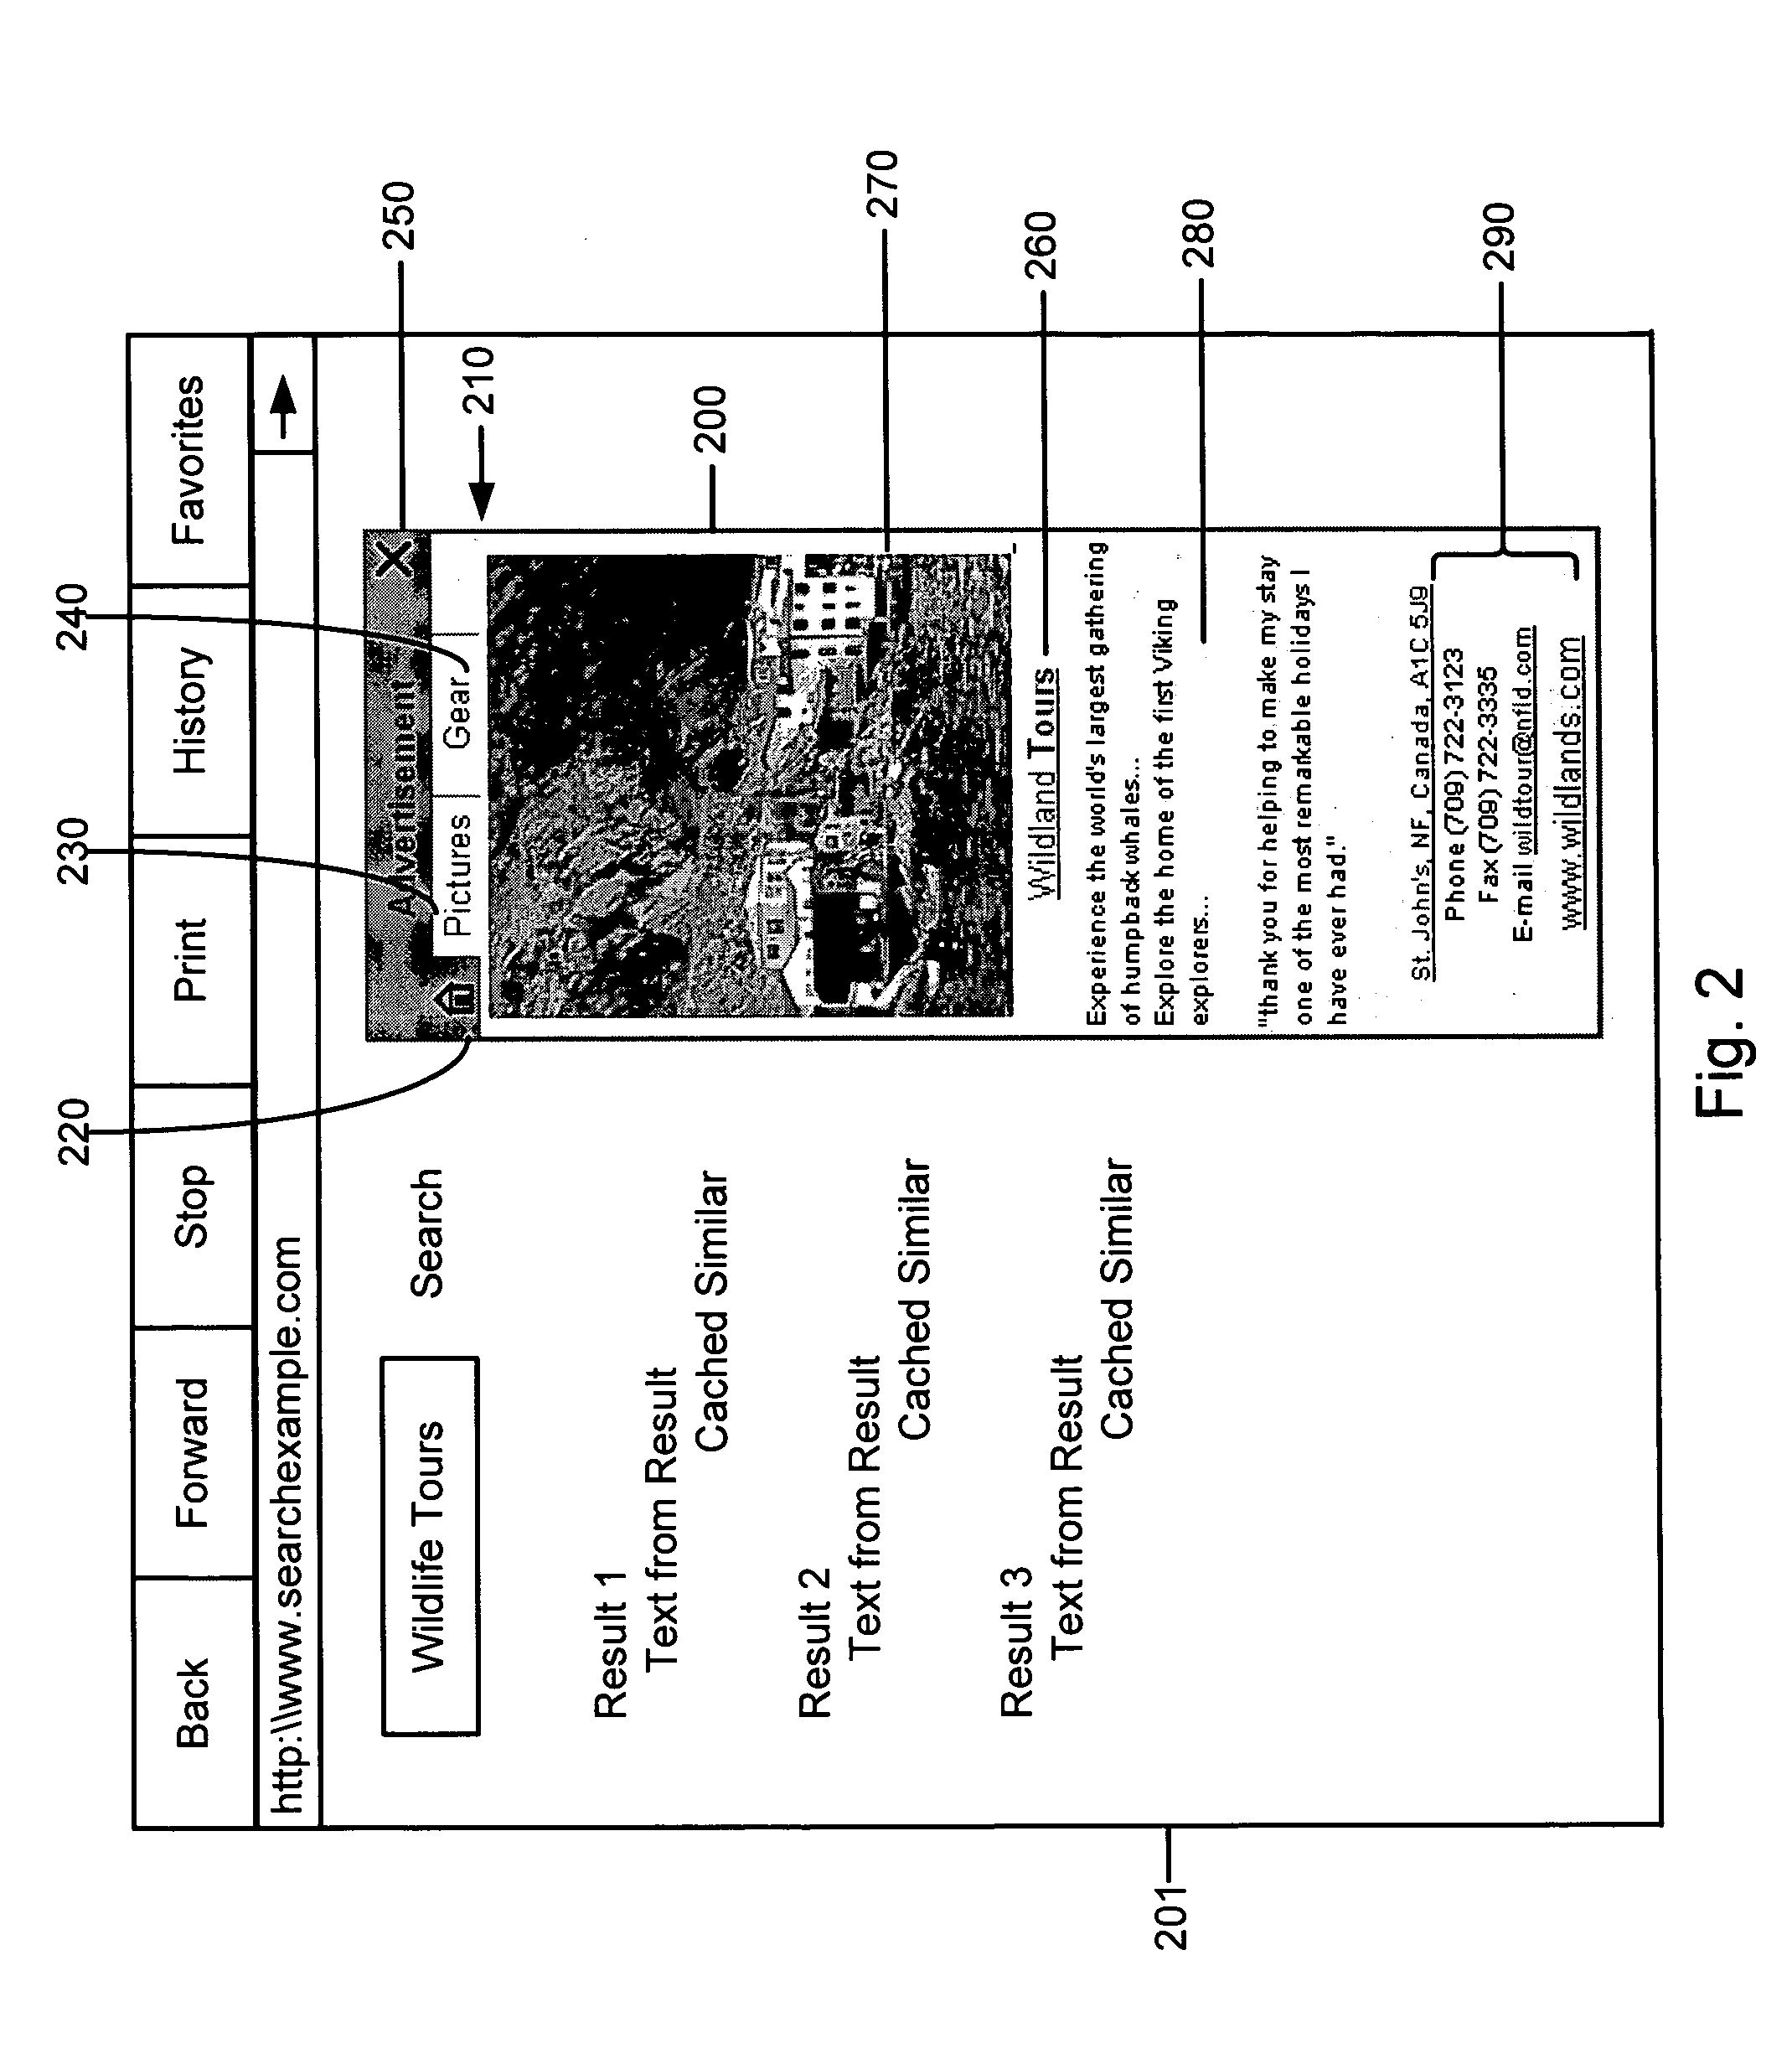 System and method for delivering internet advertisements that change between textual and graphical ads on demand by a user